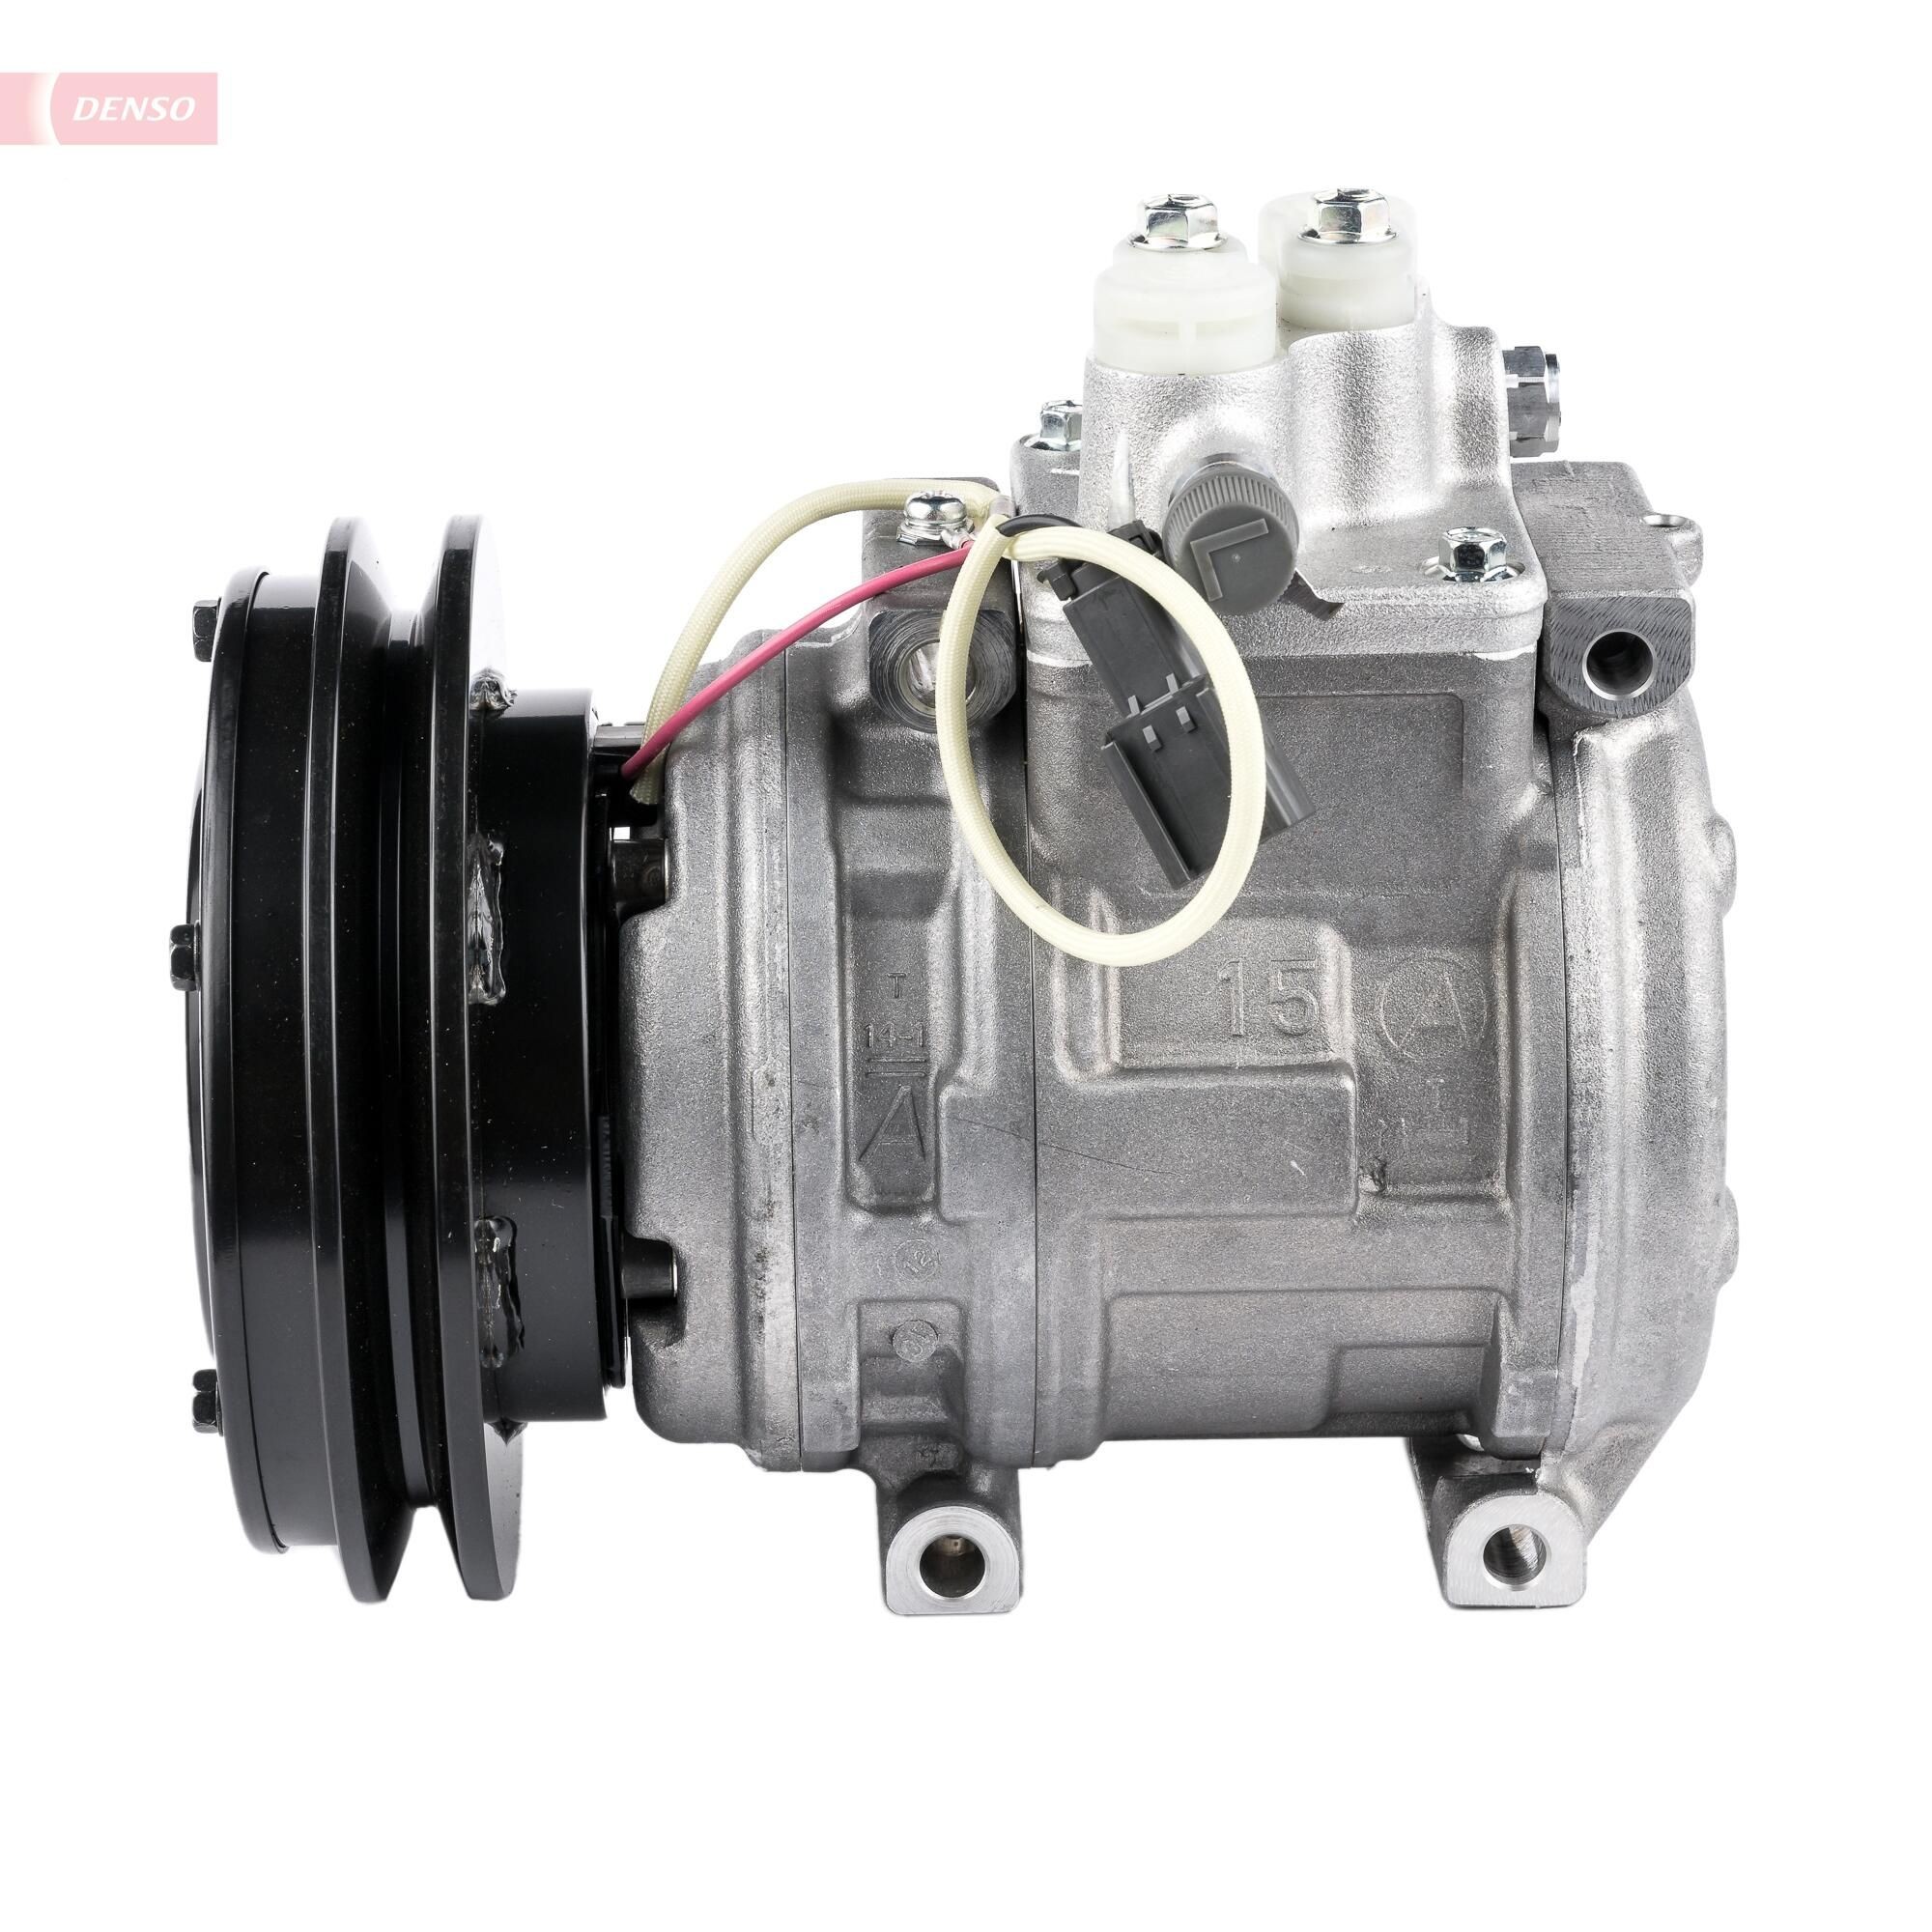 DENSO DCP99826 Air conditioner compressor 10PA15C, 24V, PAG 46, R 134a, with magnetic clutch